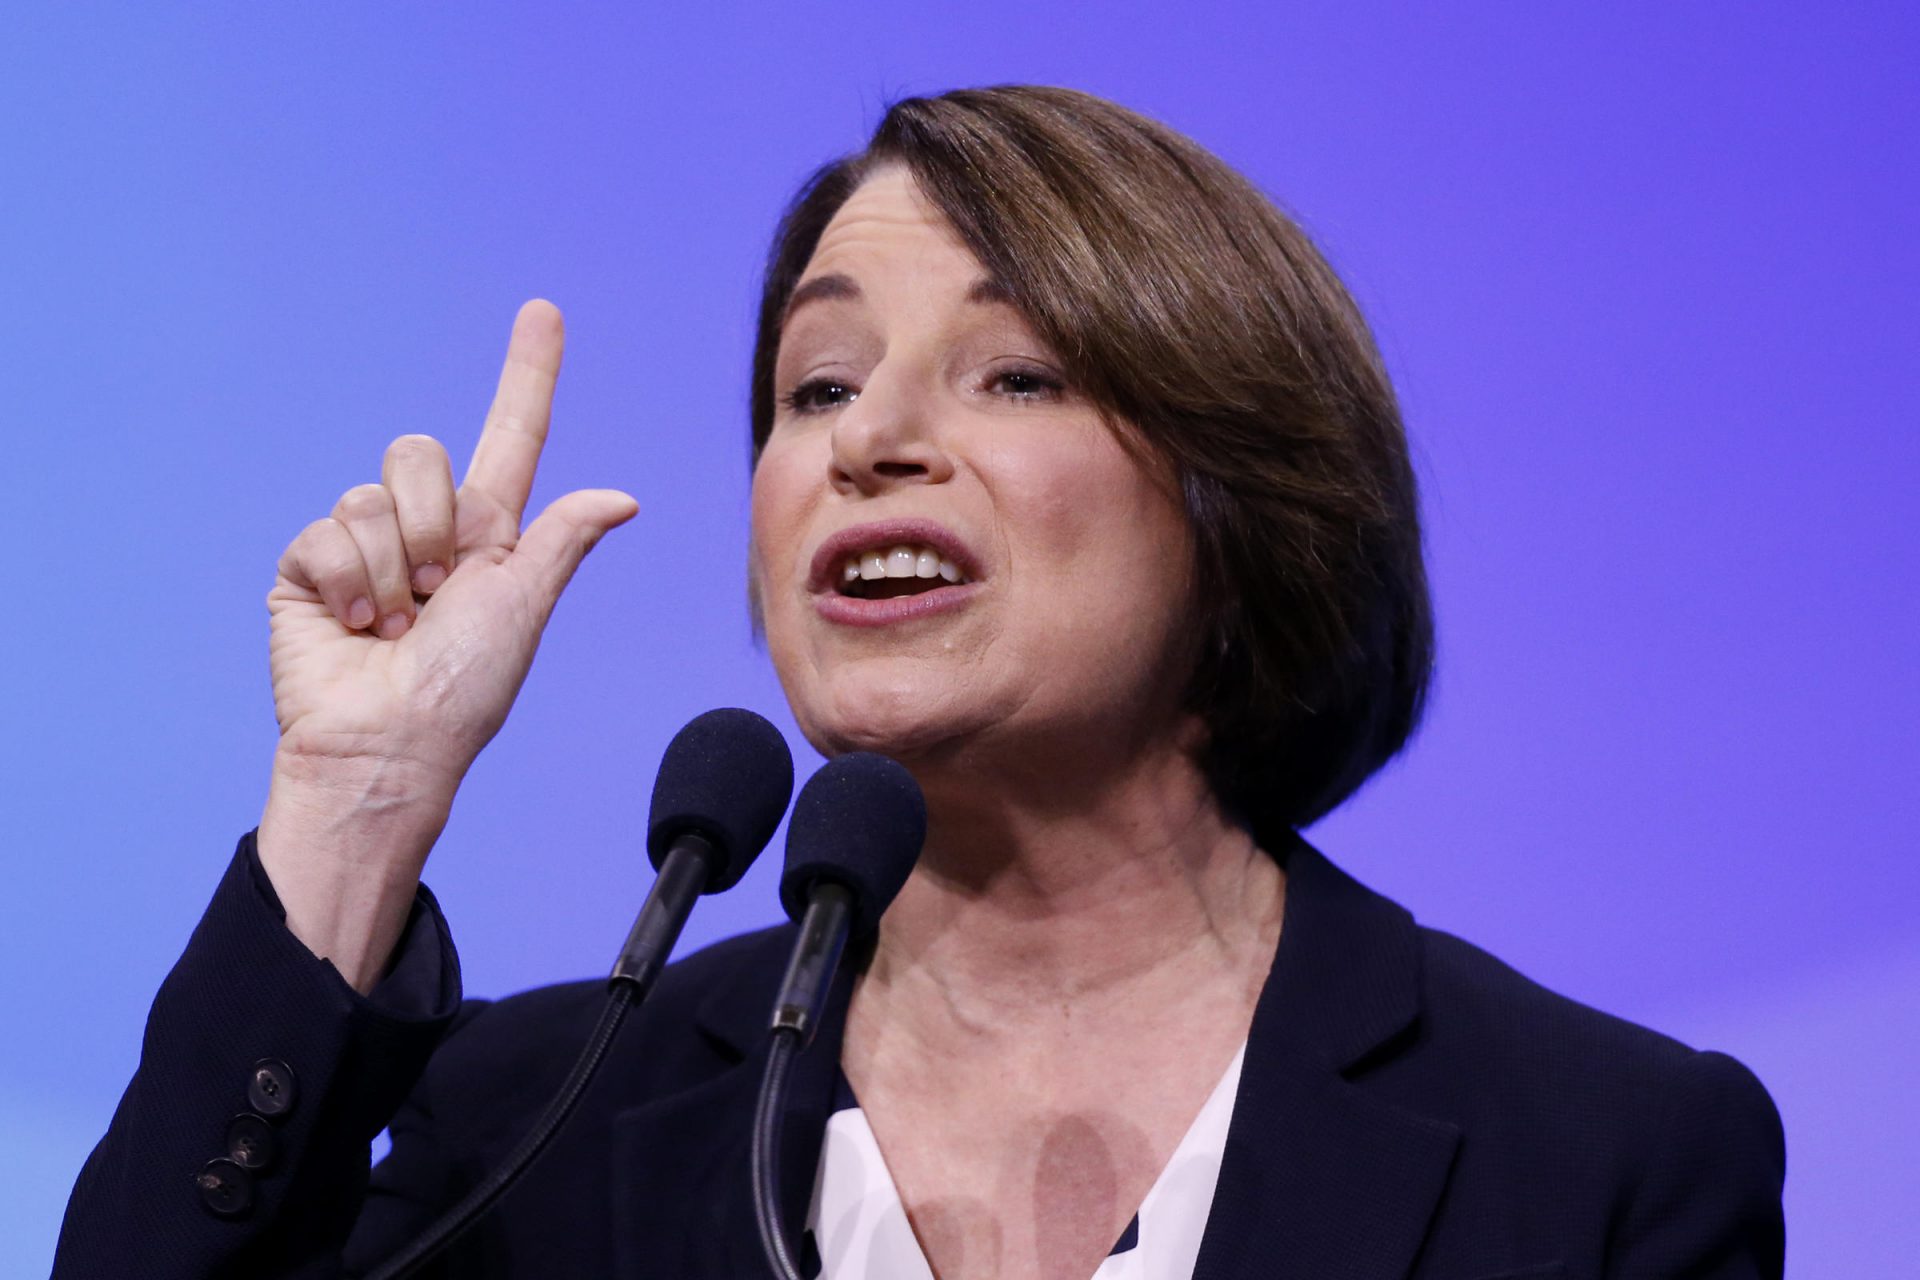 Democratic presidential candidate Sen. Amy Klobuchar, D-Minn., speaks during the New Hampshire state Democratic Party convention, Saturday, Sept. 7, 2019, in Manchester, NH.